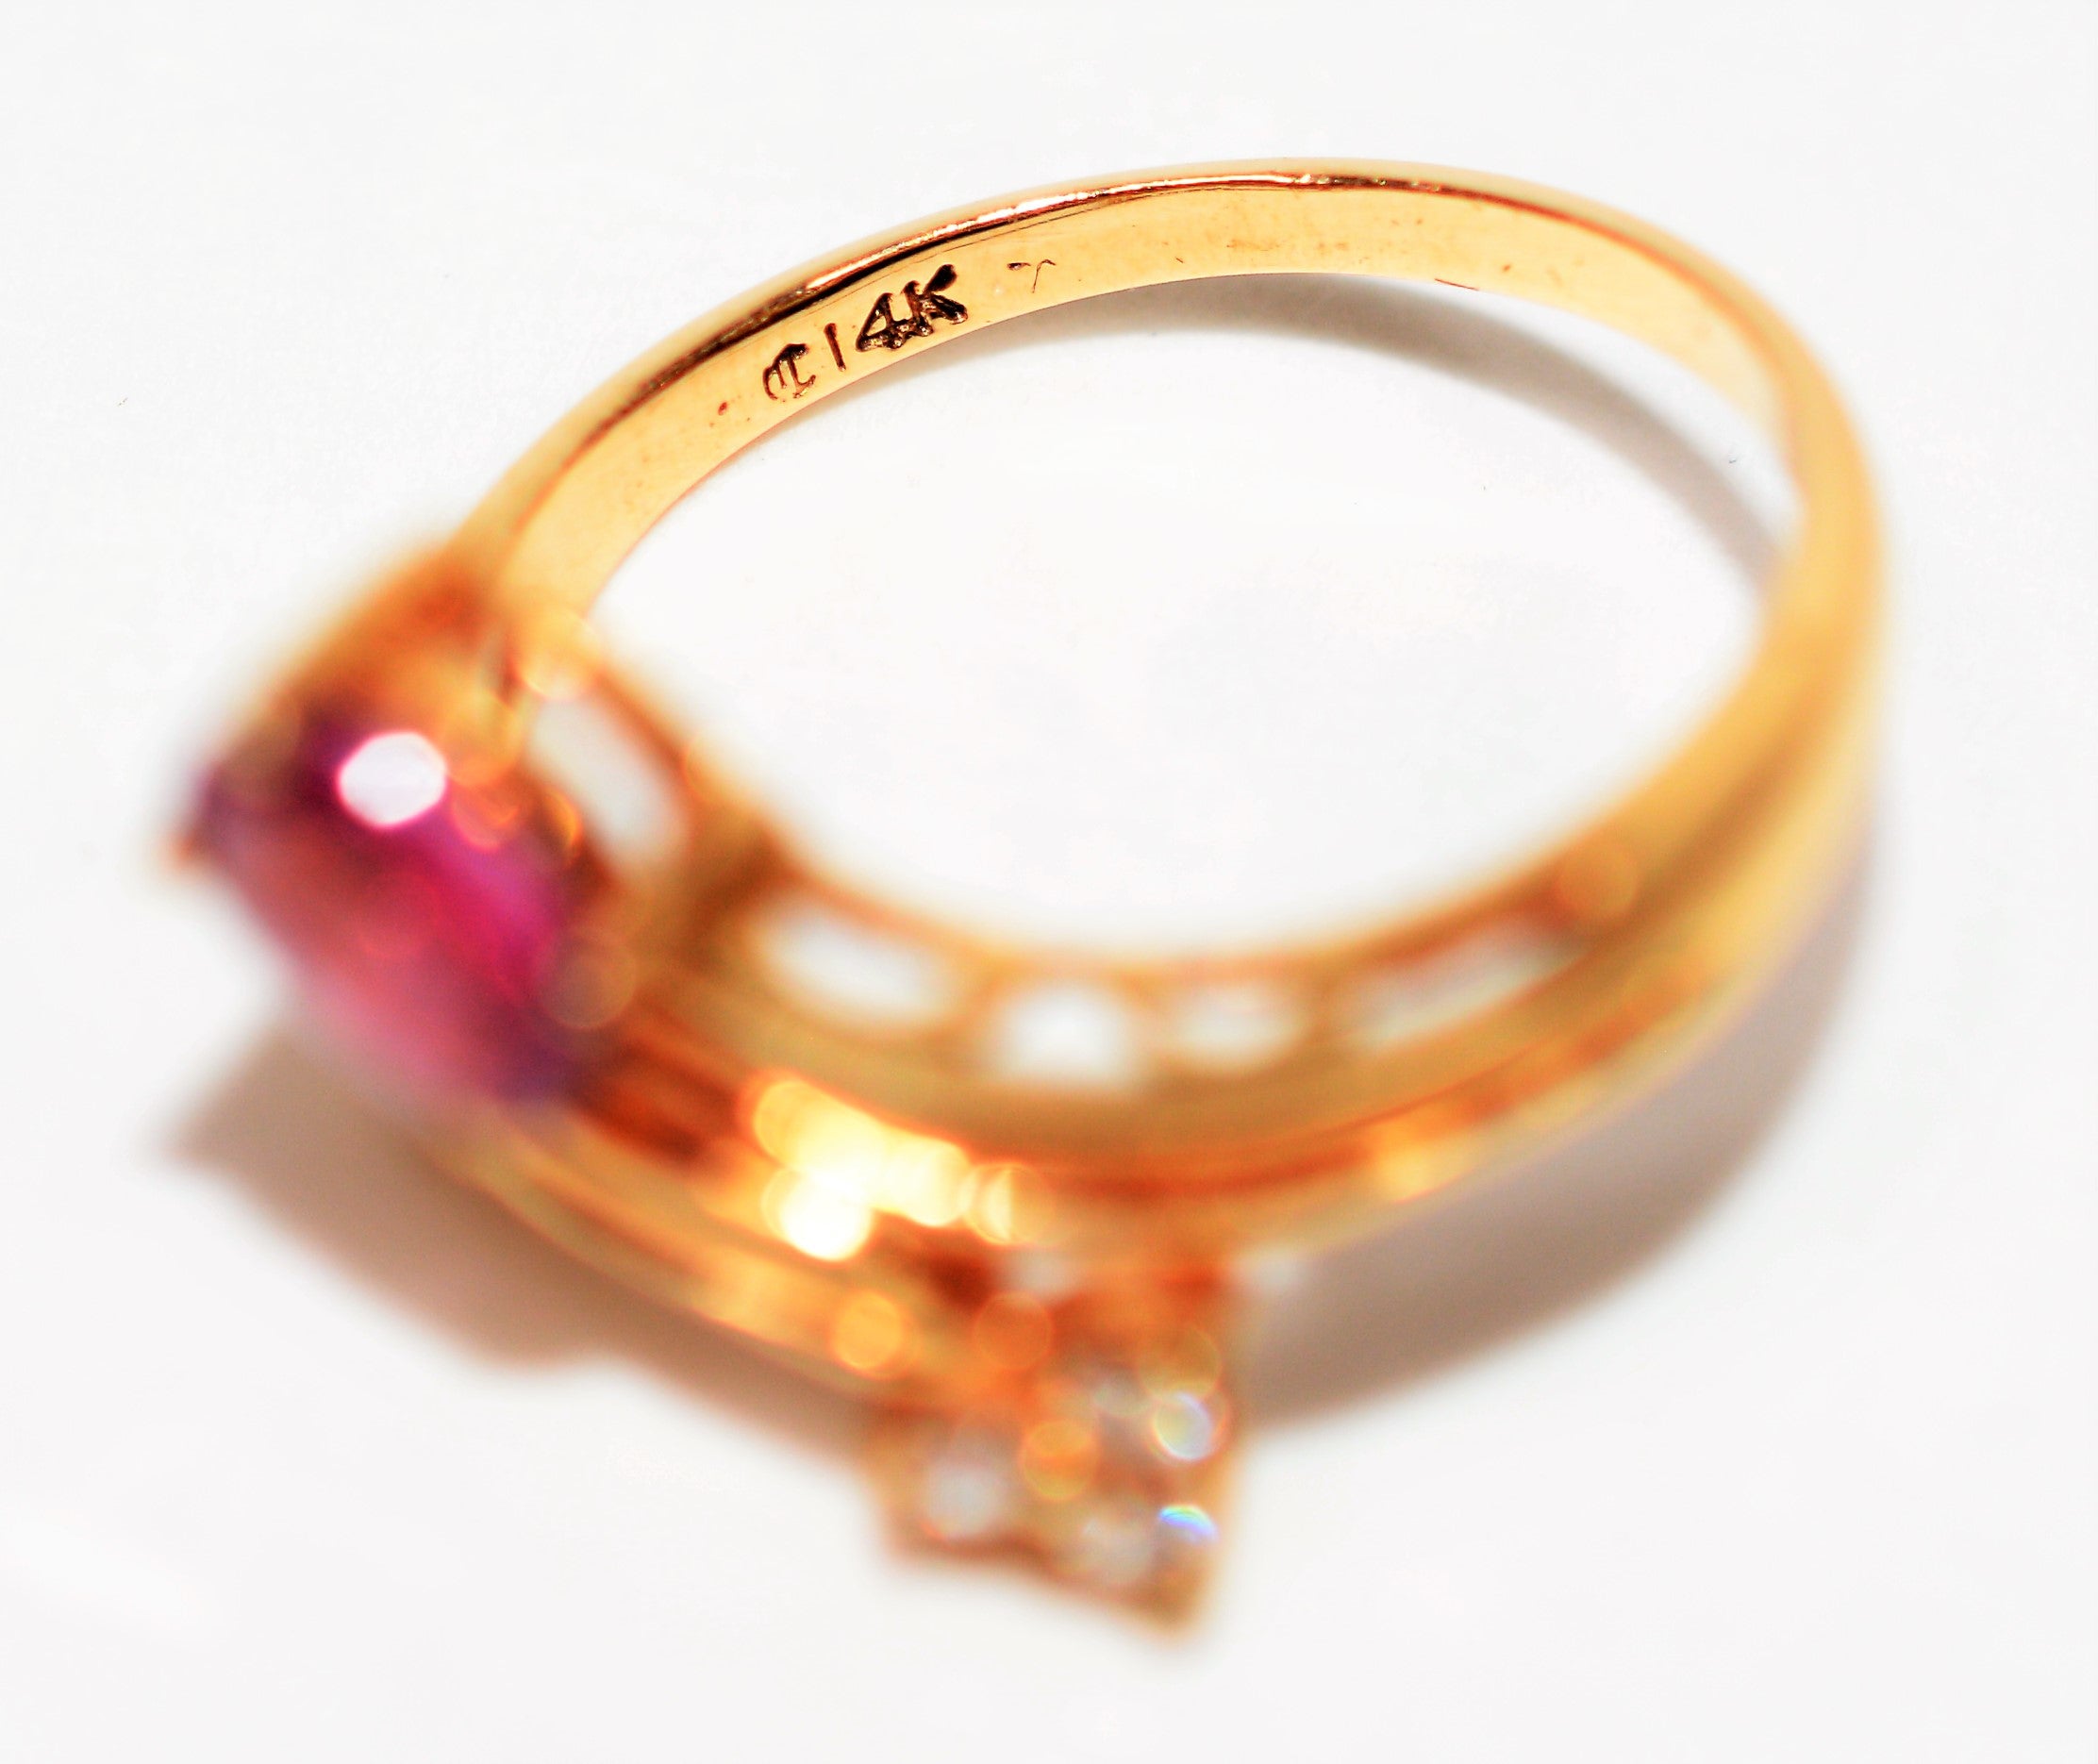 Natural Ruby & Diamond Ring 14K Solid Gold .56tcw Ruby Ring Women’s Ring Cocktail Ring Statement Ring Vintage Jewelry July Birthstone Ring